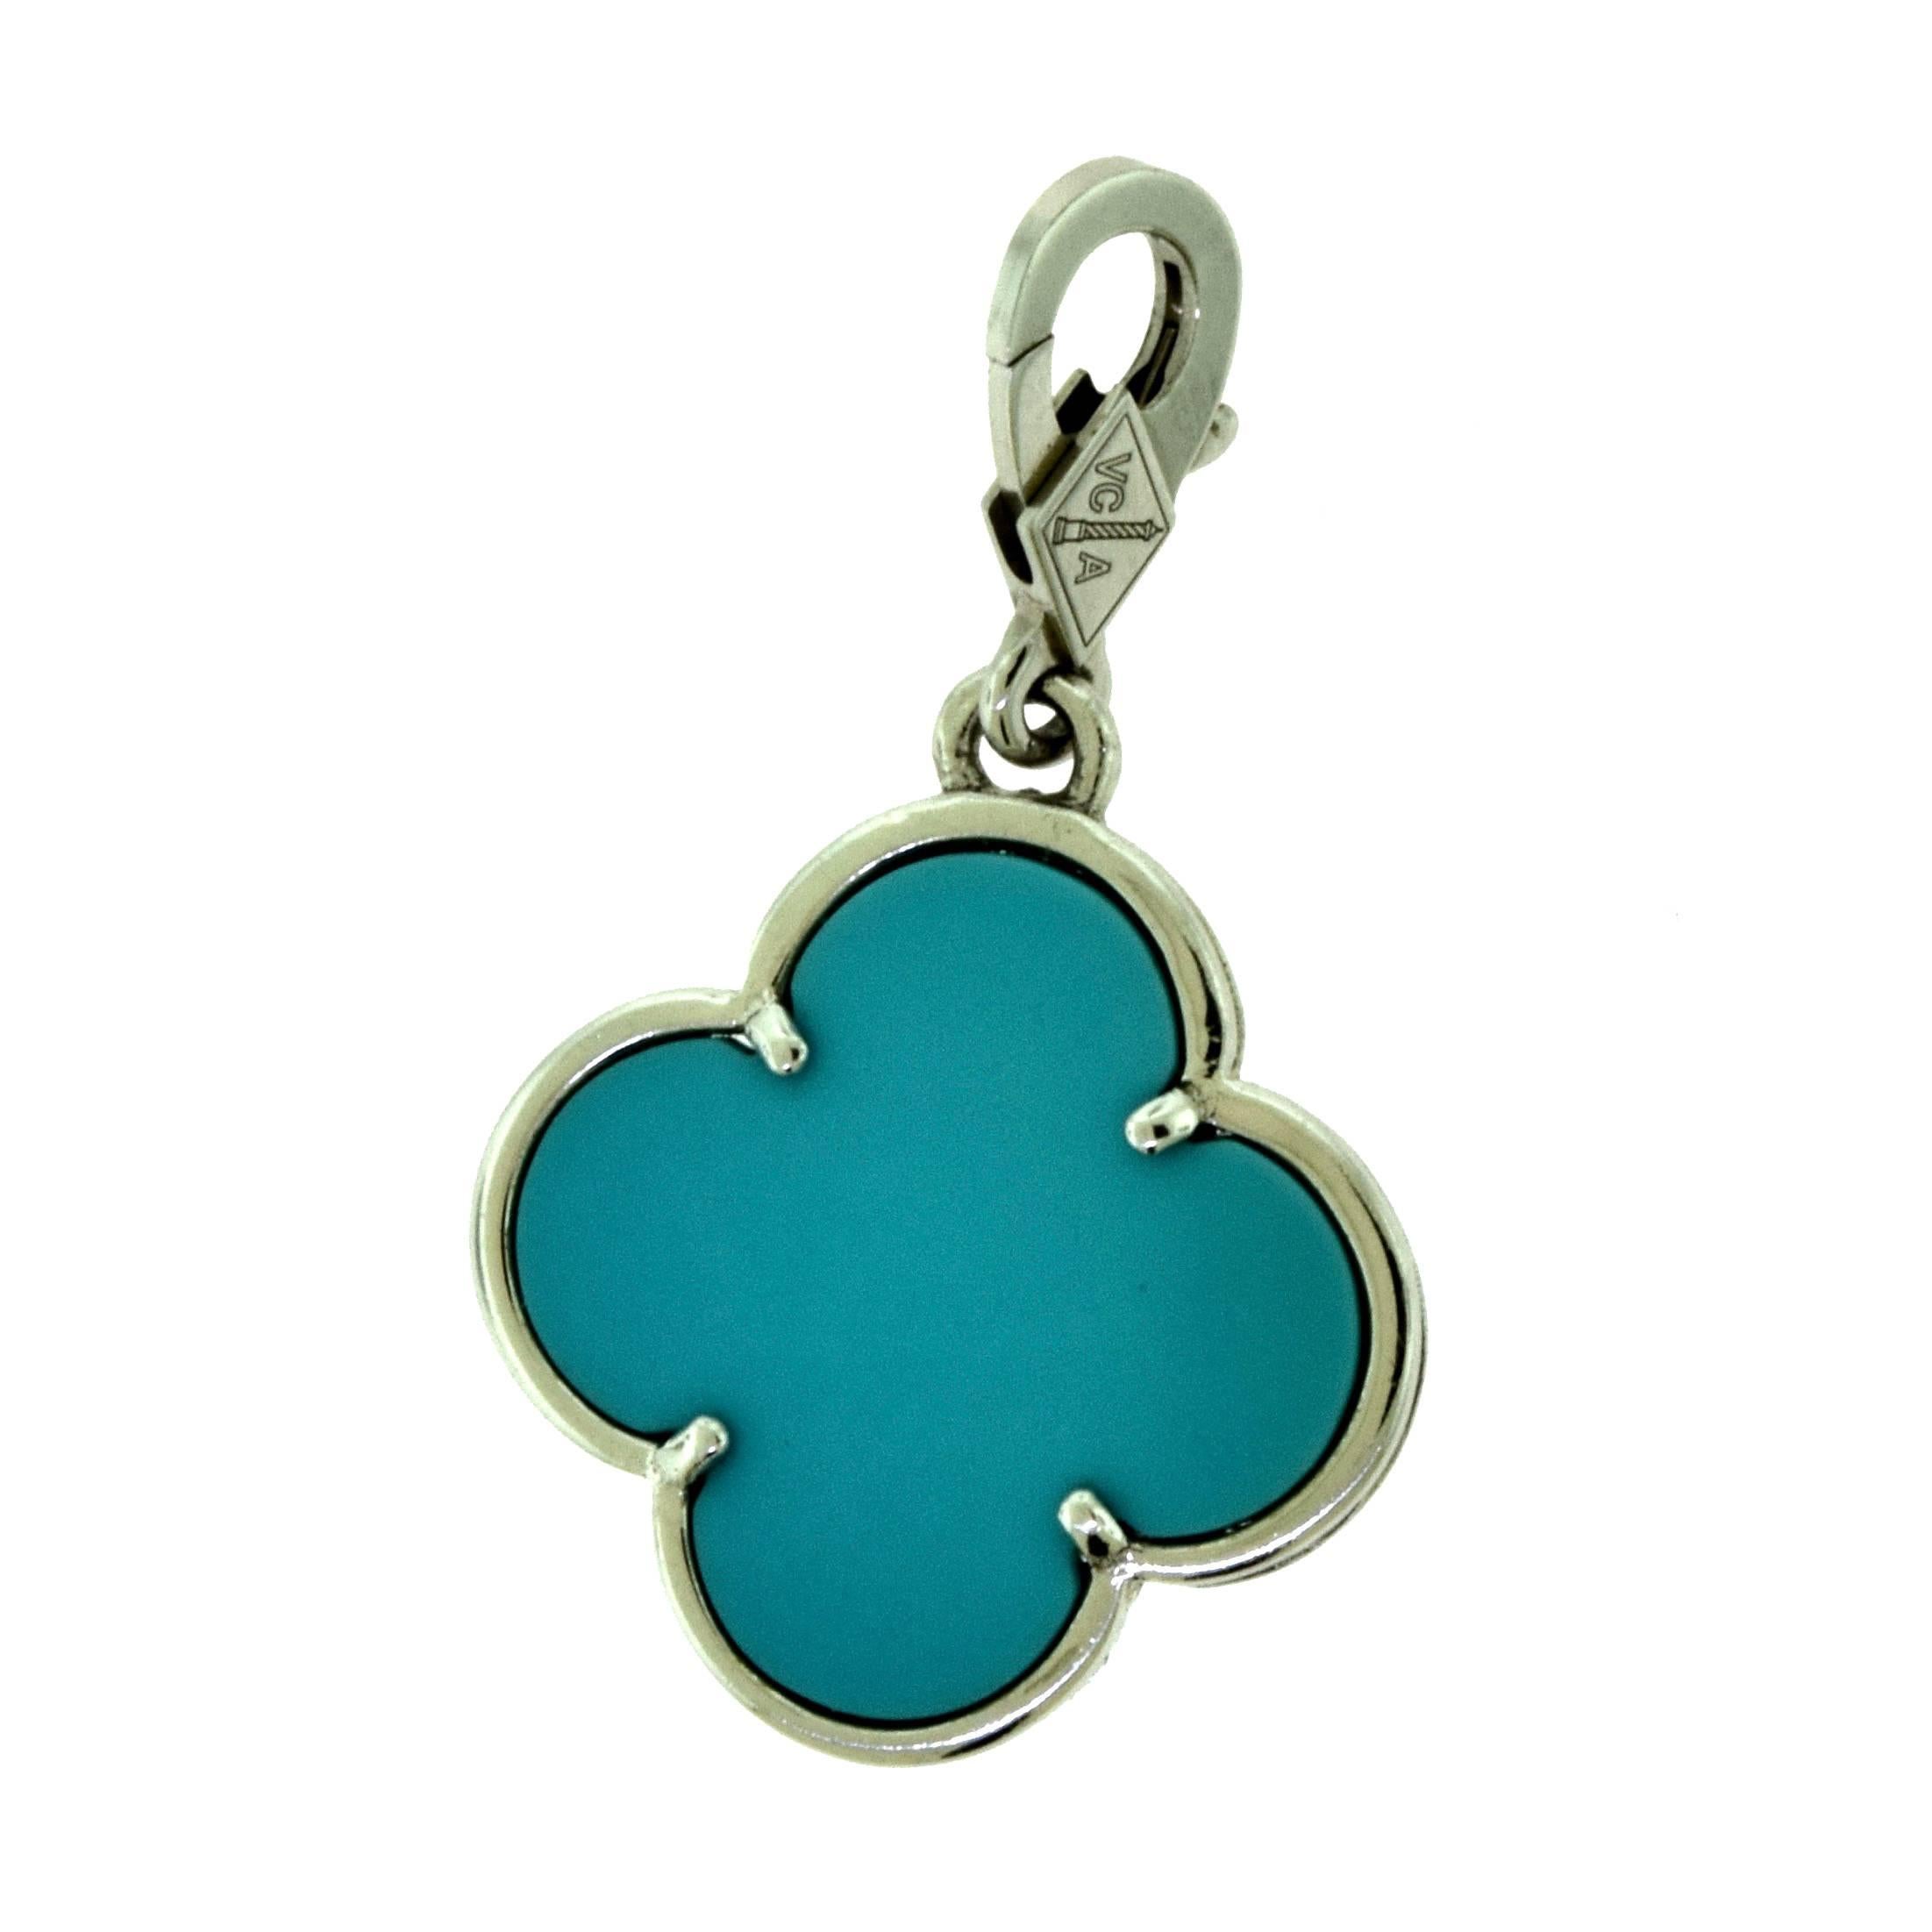 Van Cleef & Arpels Lg. Magic Alhambra Turquoise Pendant in White Gold, Chain 1